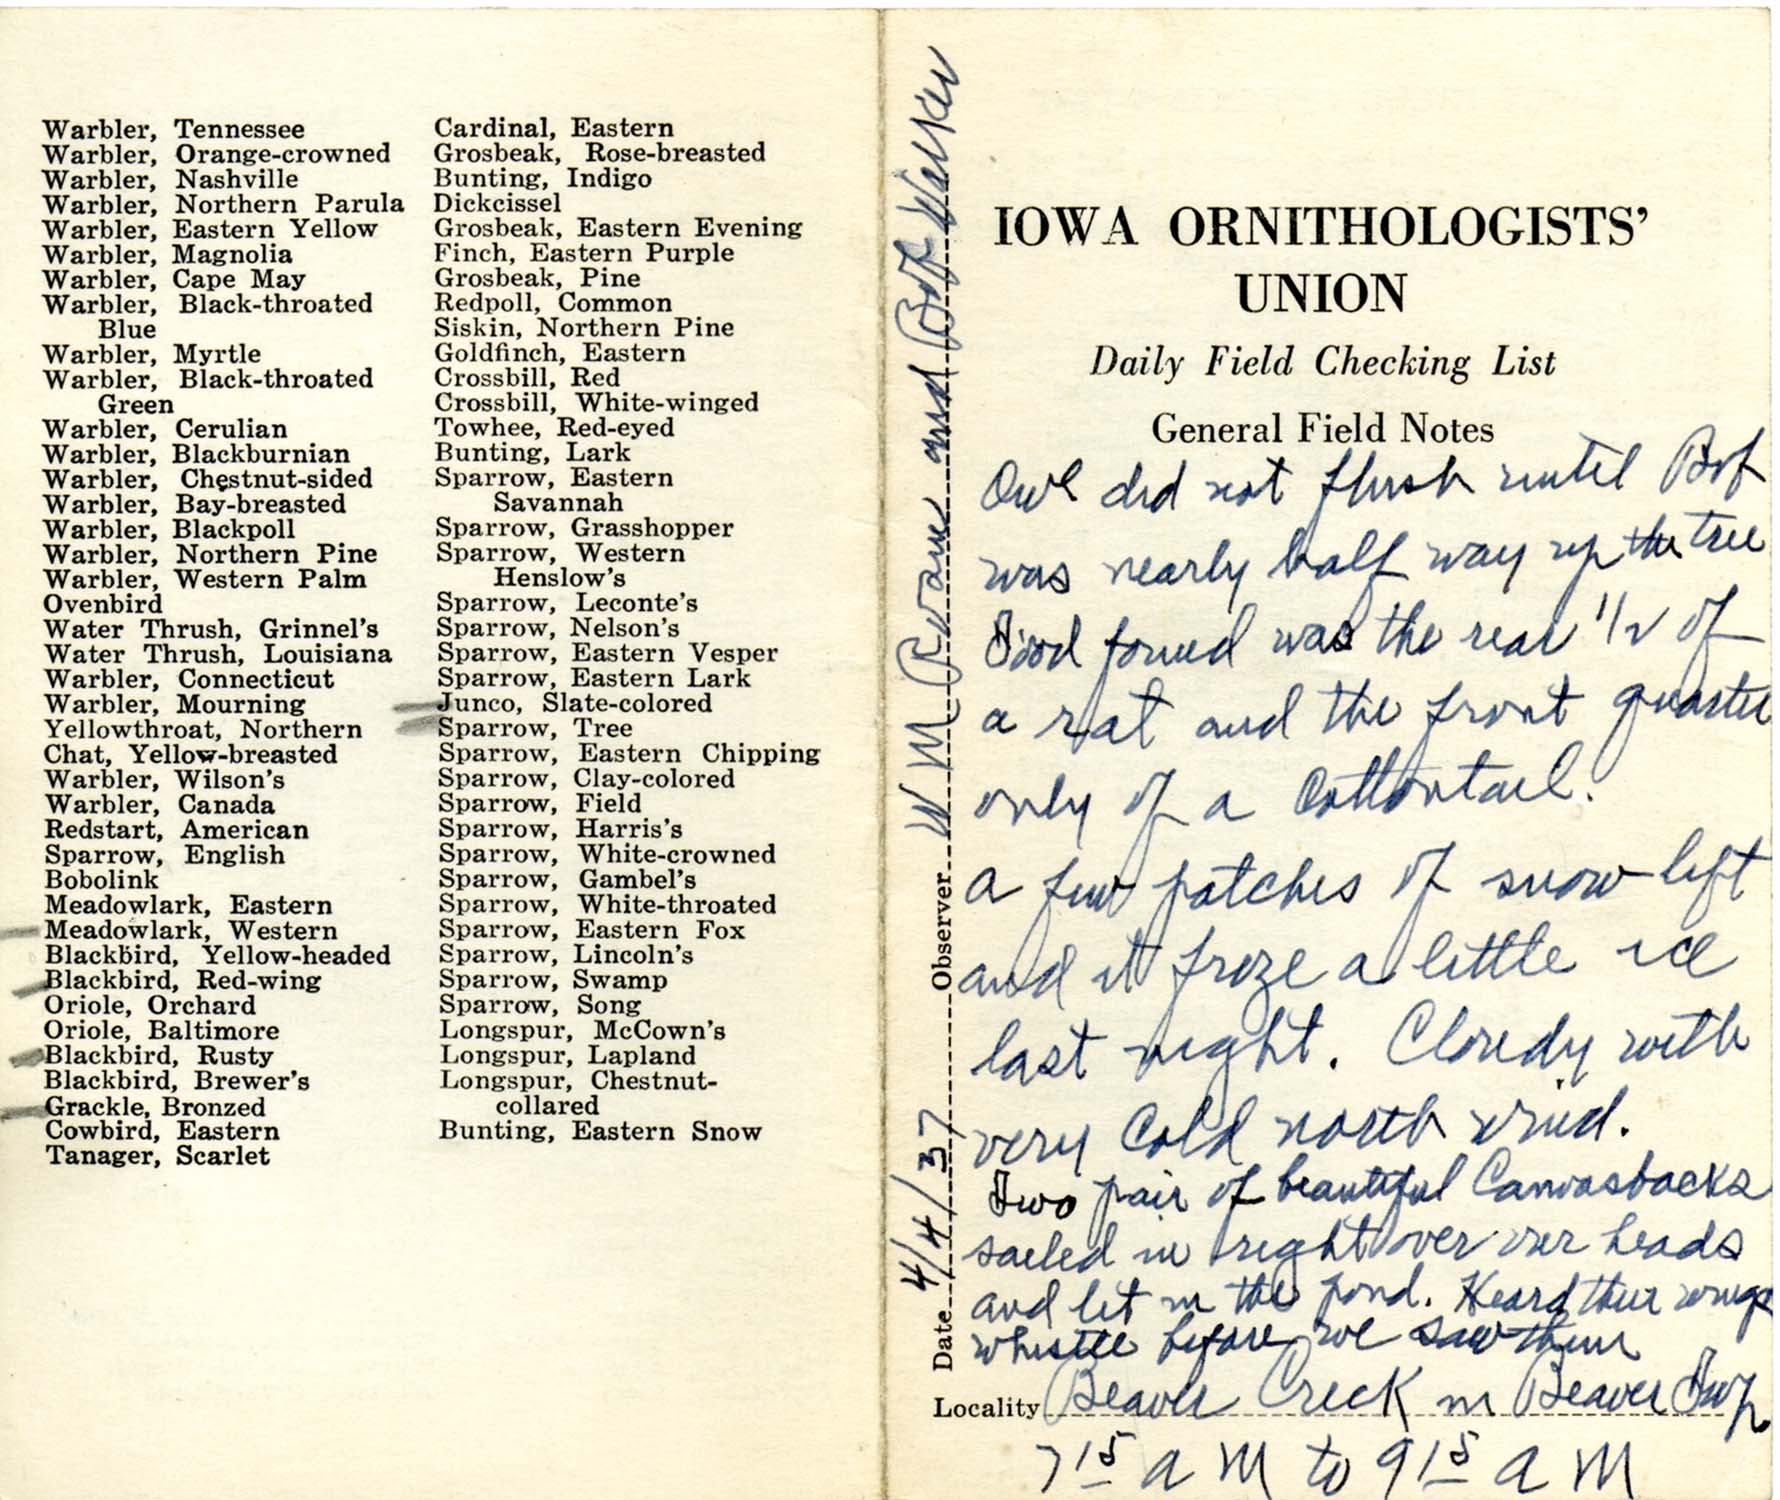 Daily field checking list by Walter Rosene, April 4, 1937